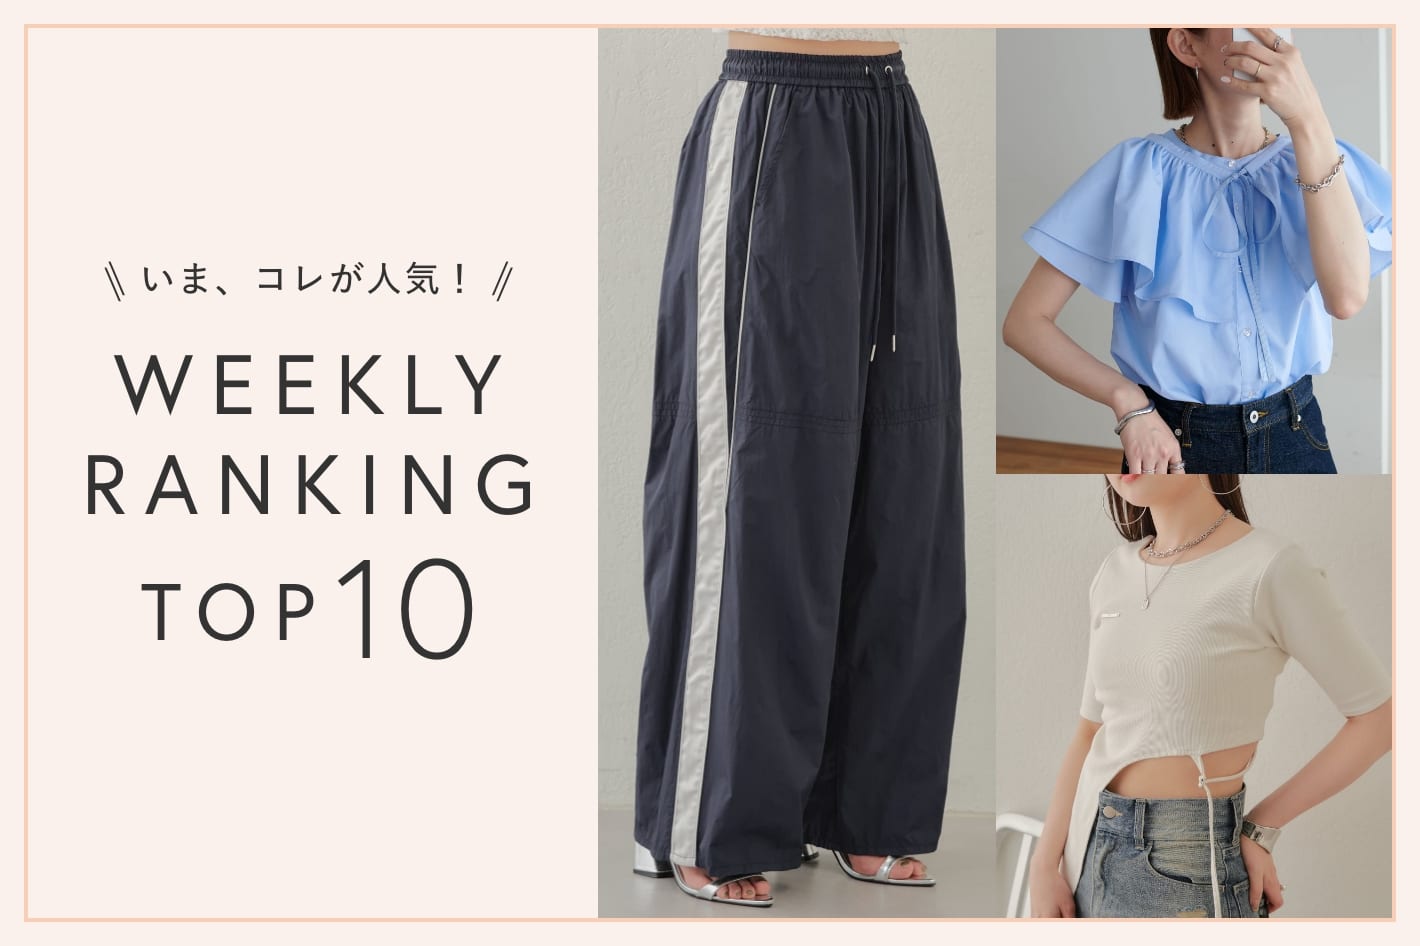 OUTLET いま、これが人気！WEEKLY RANKING TOP10！【6/17更新】